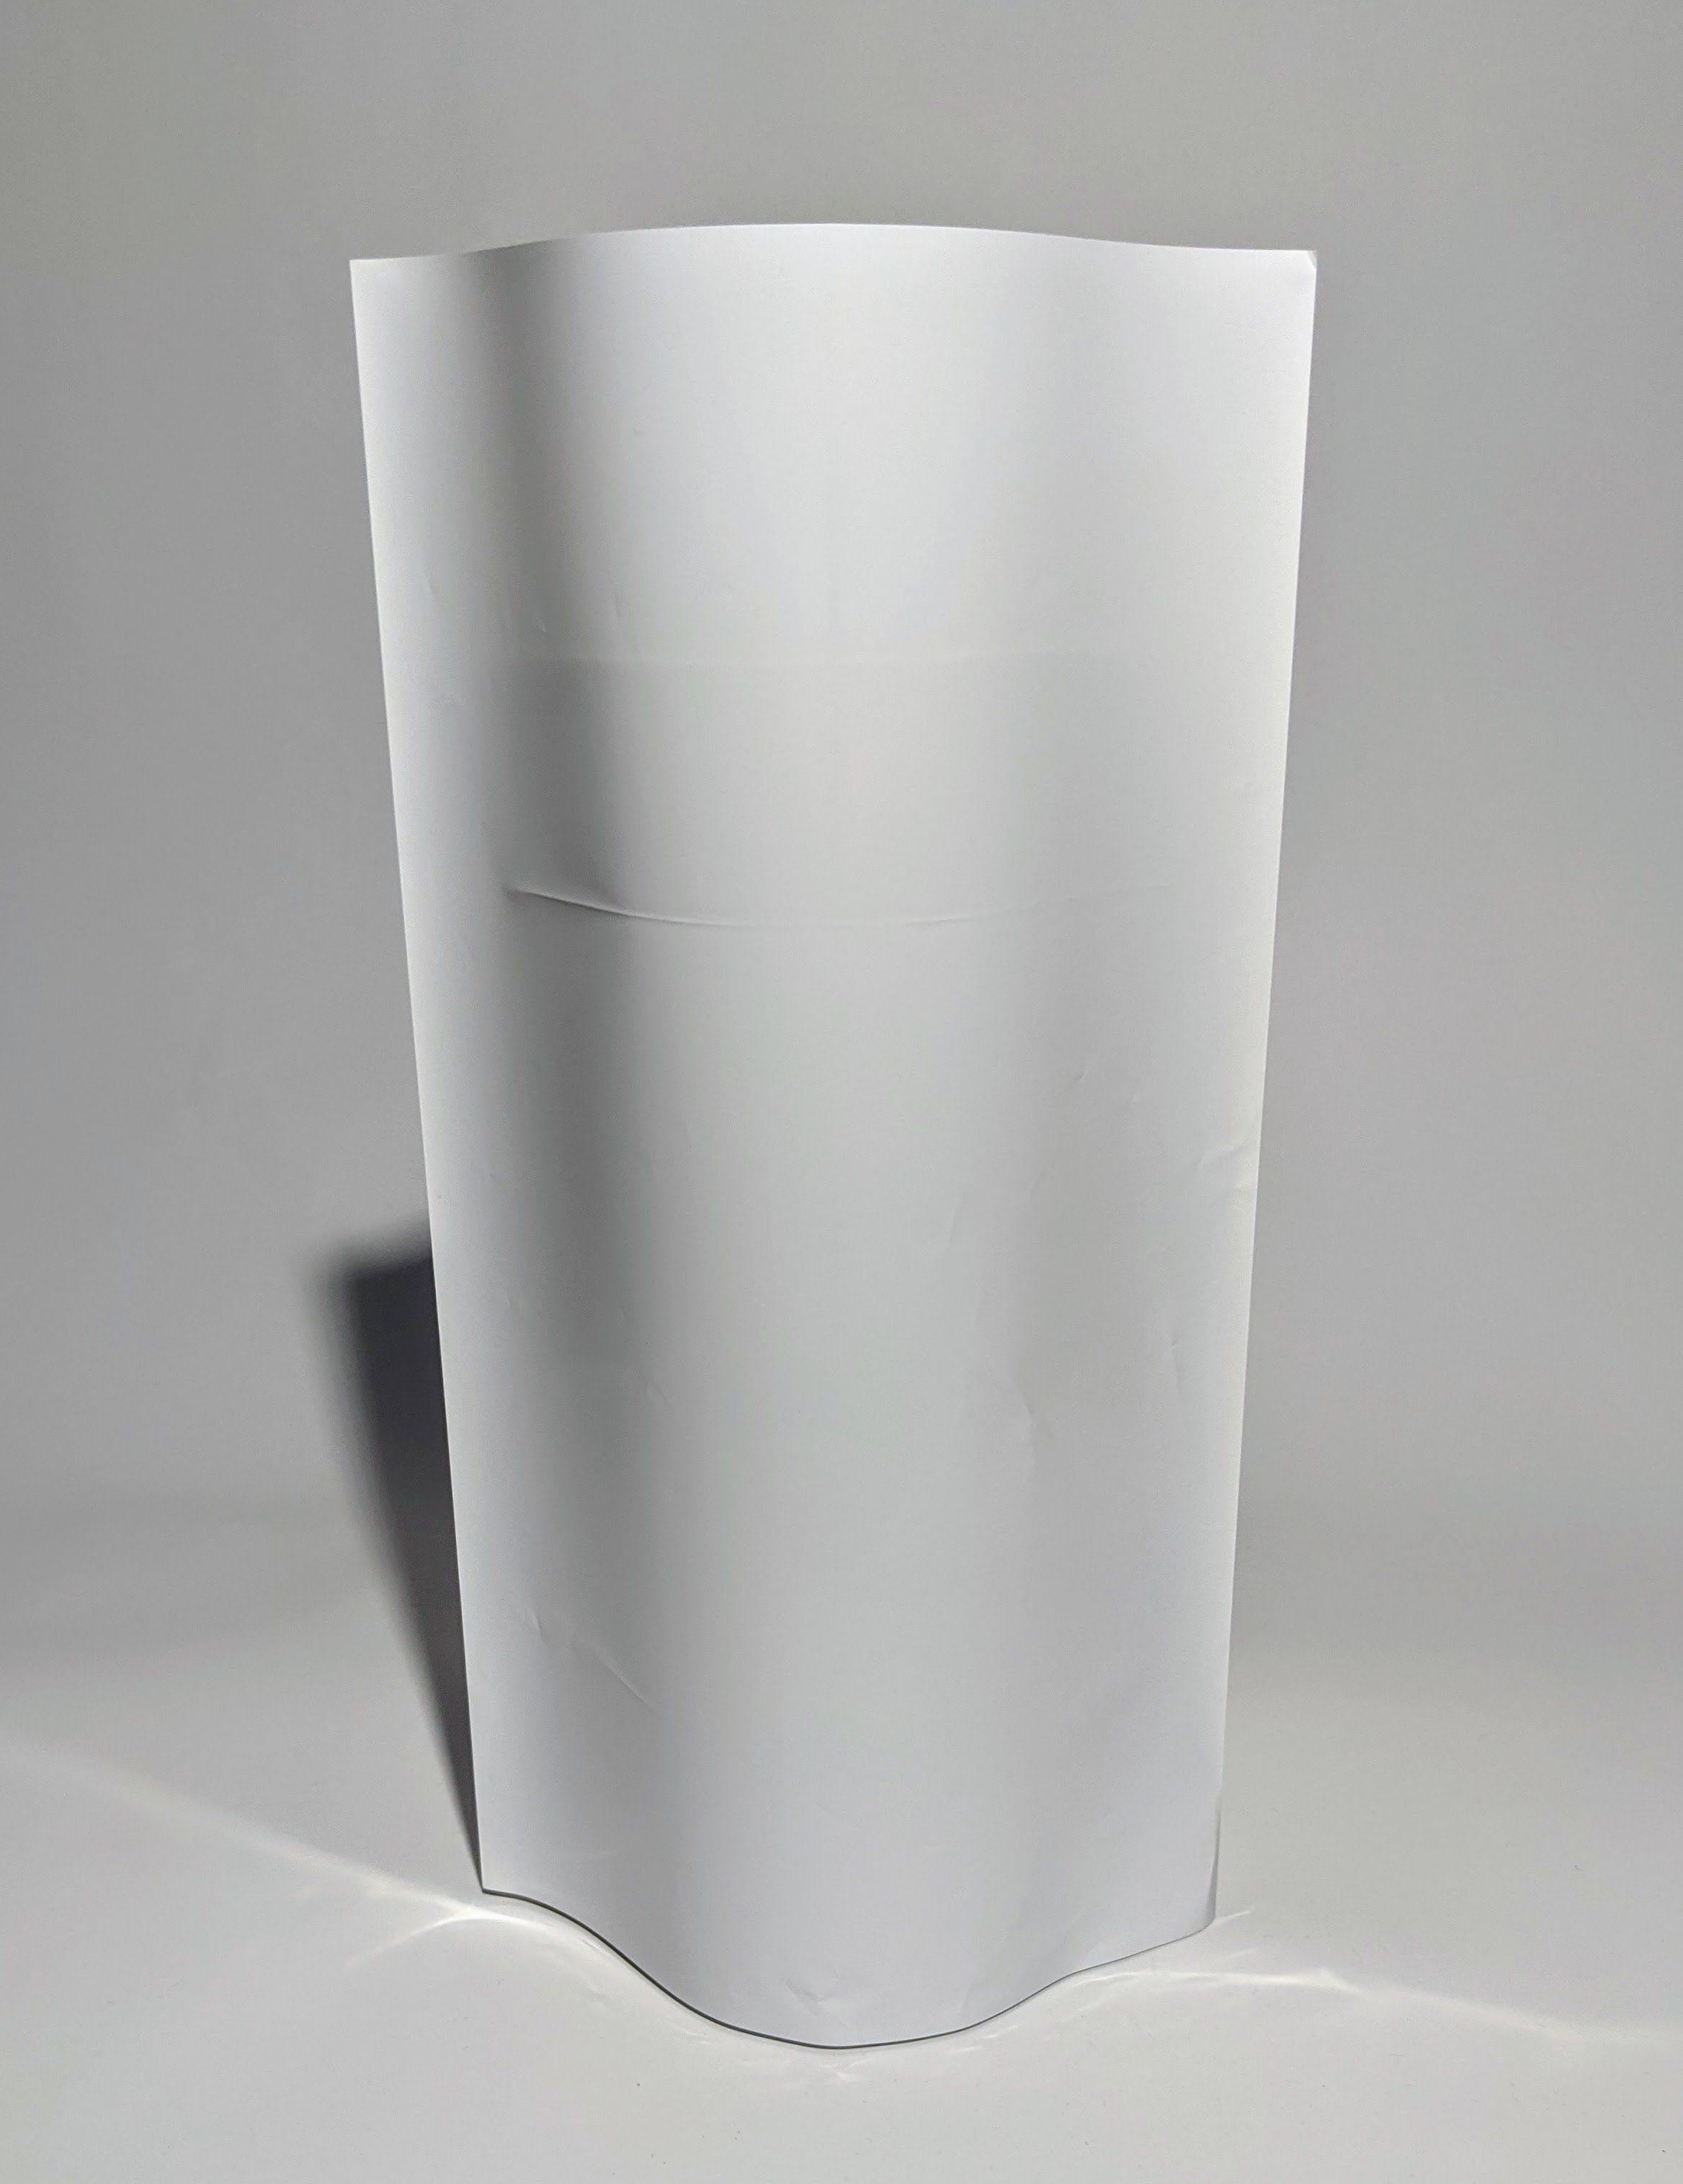 100 Pieces Sublimation Shrink Wrap Sleeves 5x10 Inch White Bag For 567g  Tight Tumblers, Heat Transf